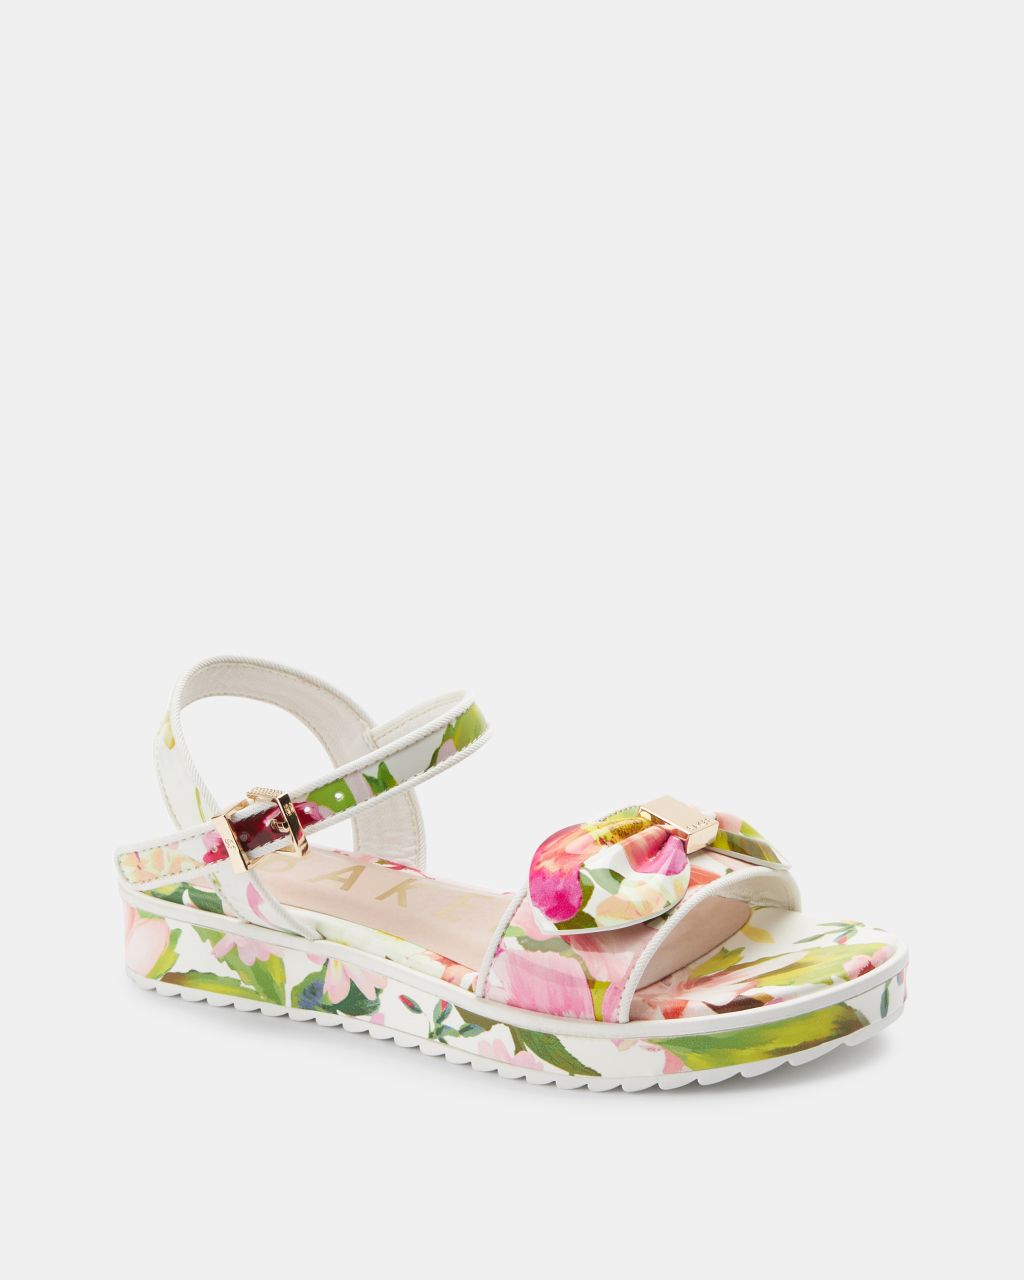 Girls' Floral Bow Sandals In White, Juleea